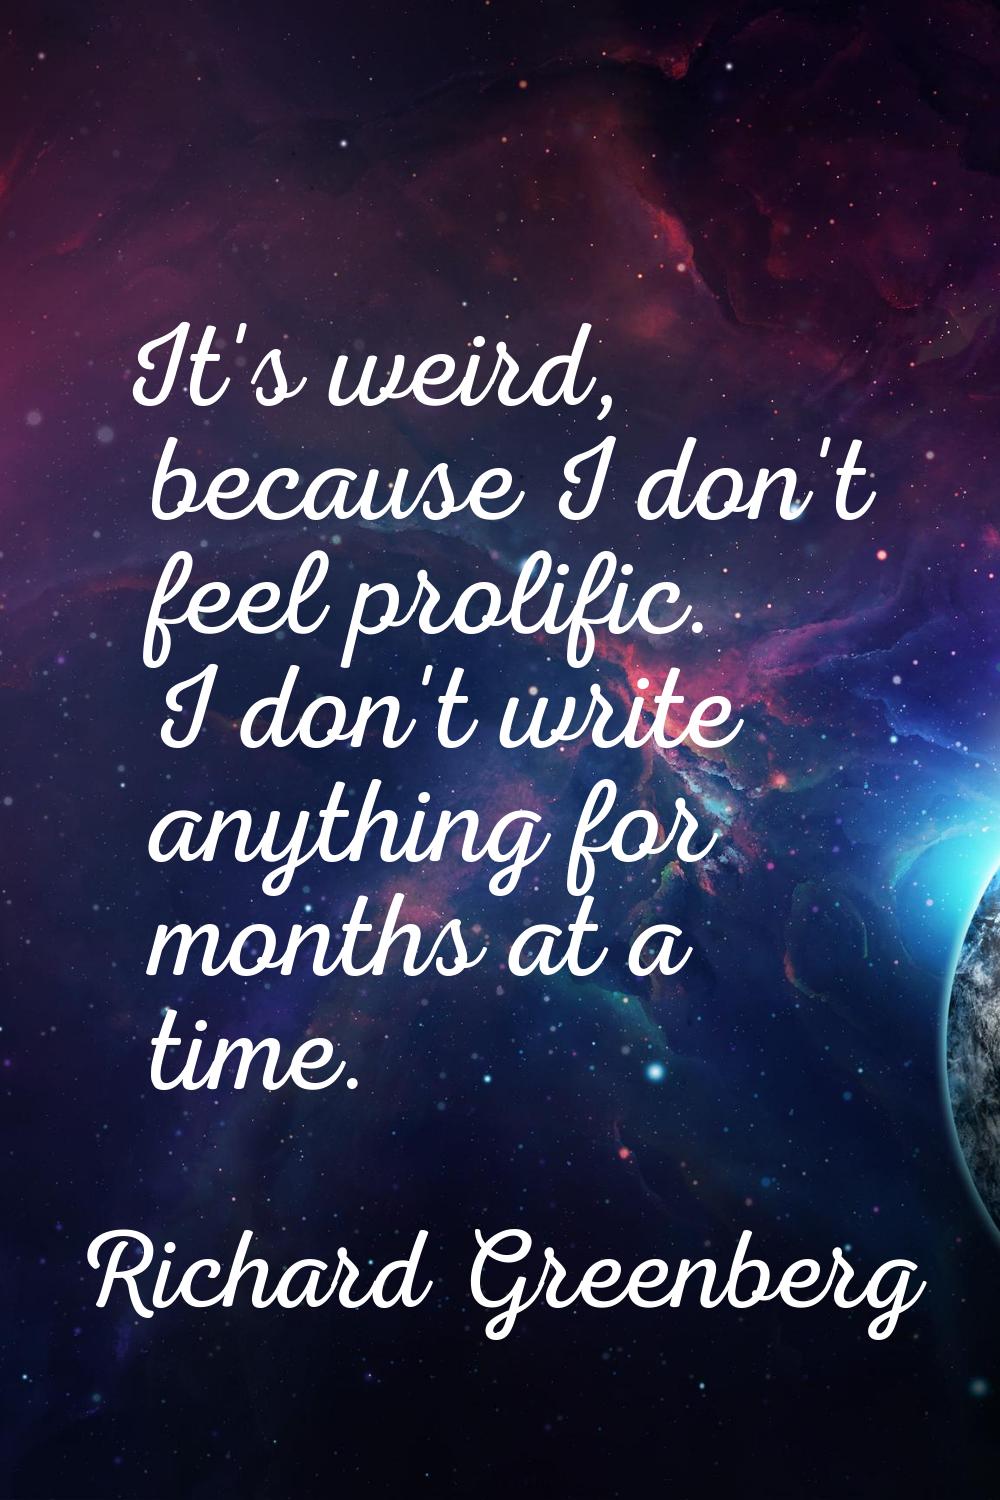 It's weird, because I don't feel prolific. I don't write anything for months at a time.